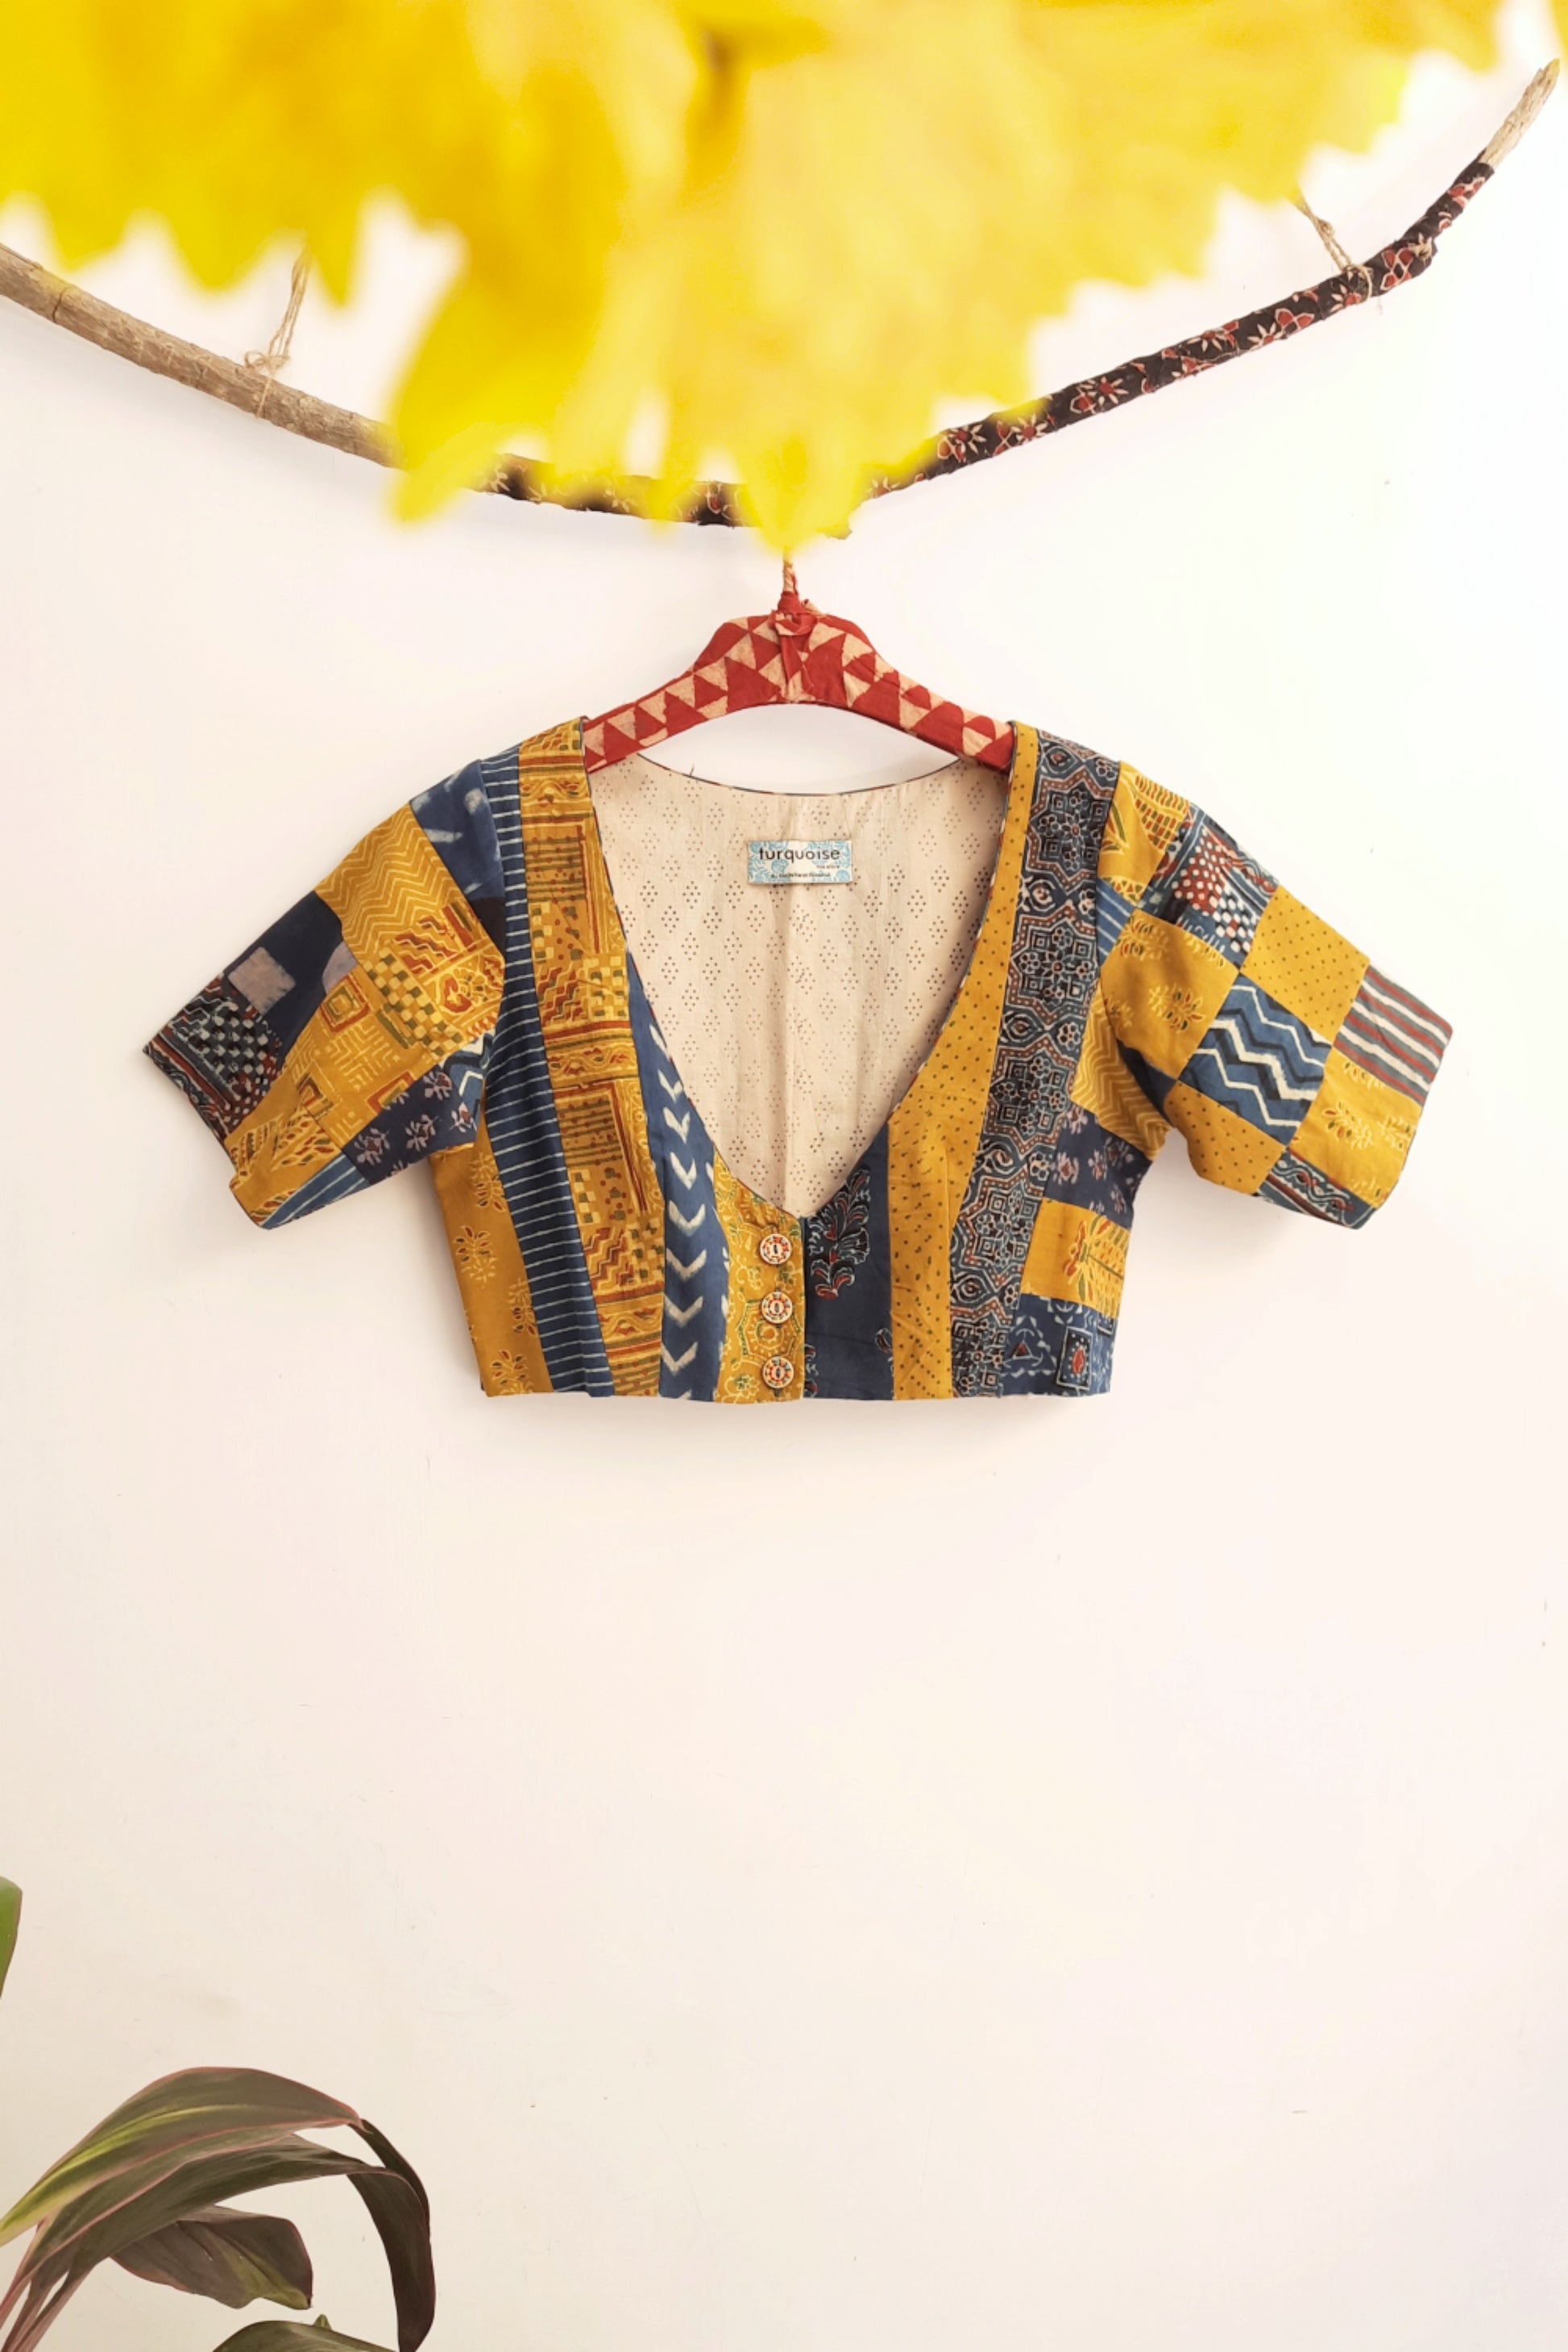 Patchwork blouse in indigo and turmeric yellow color, Ajrakh patchwork blouse, Conscious clothing